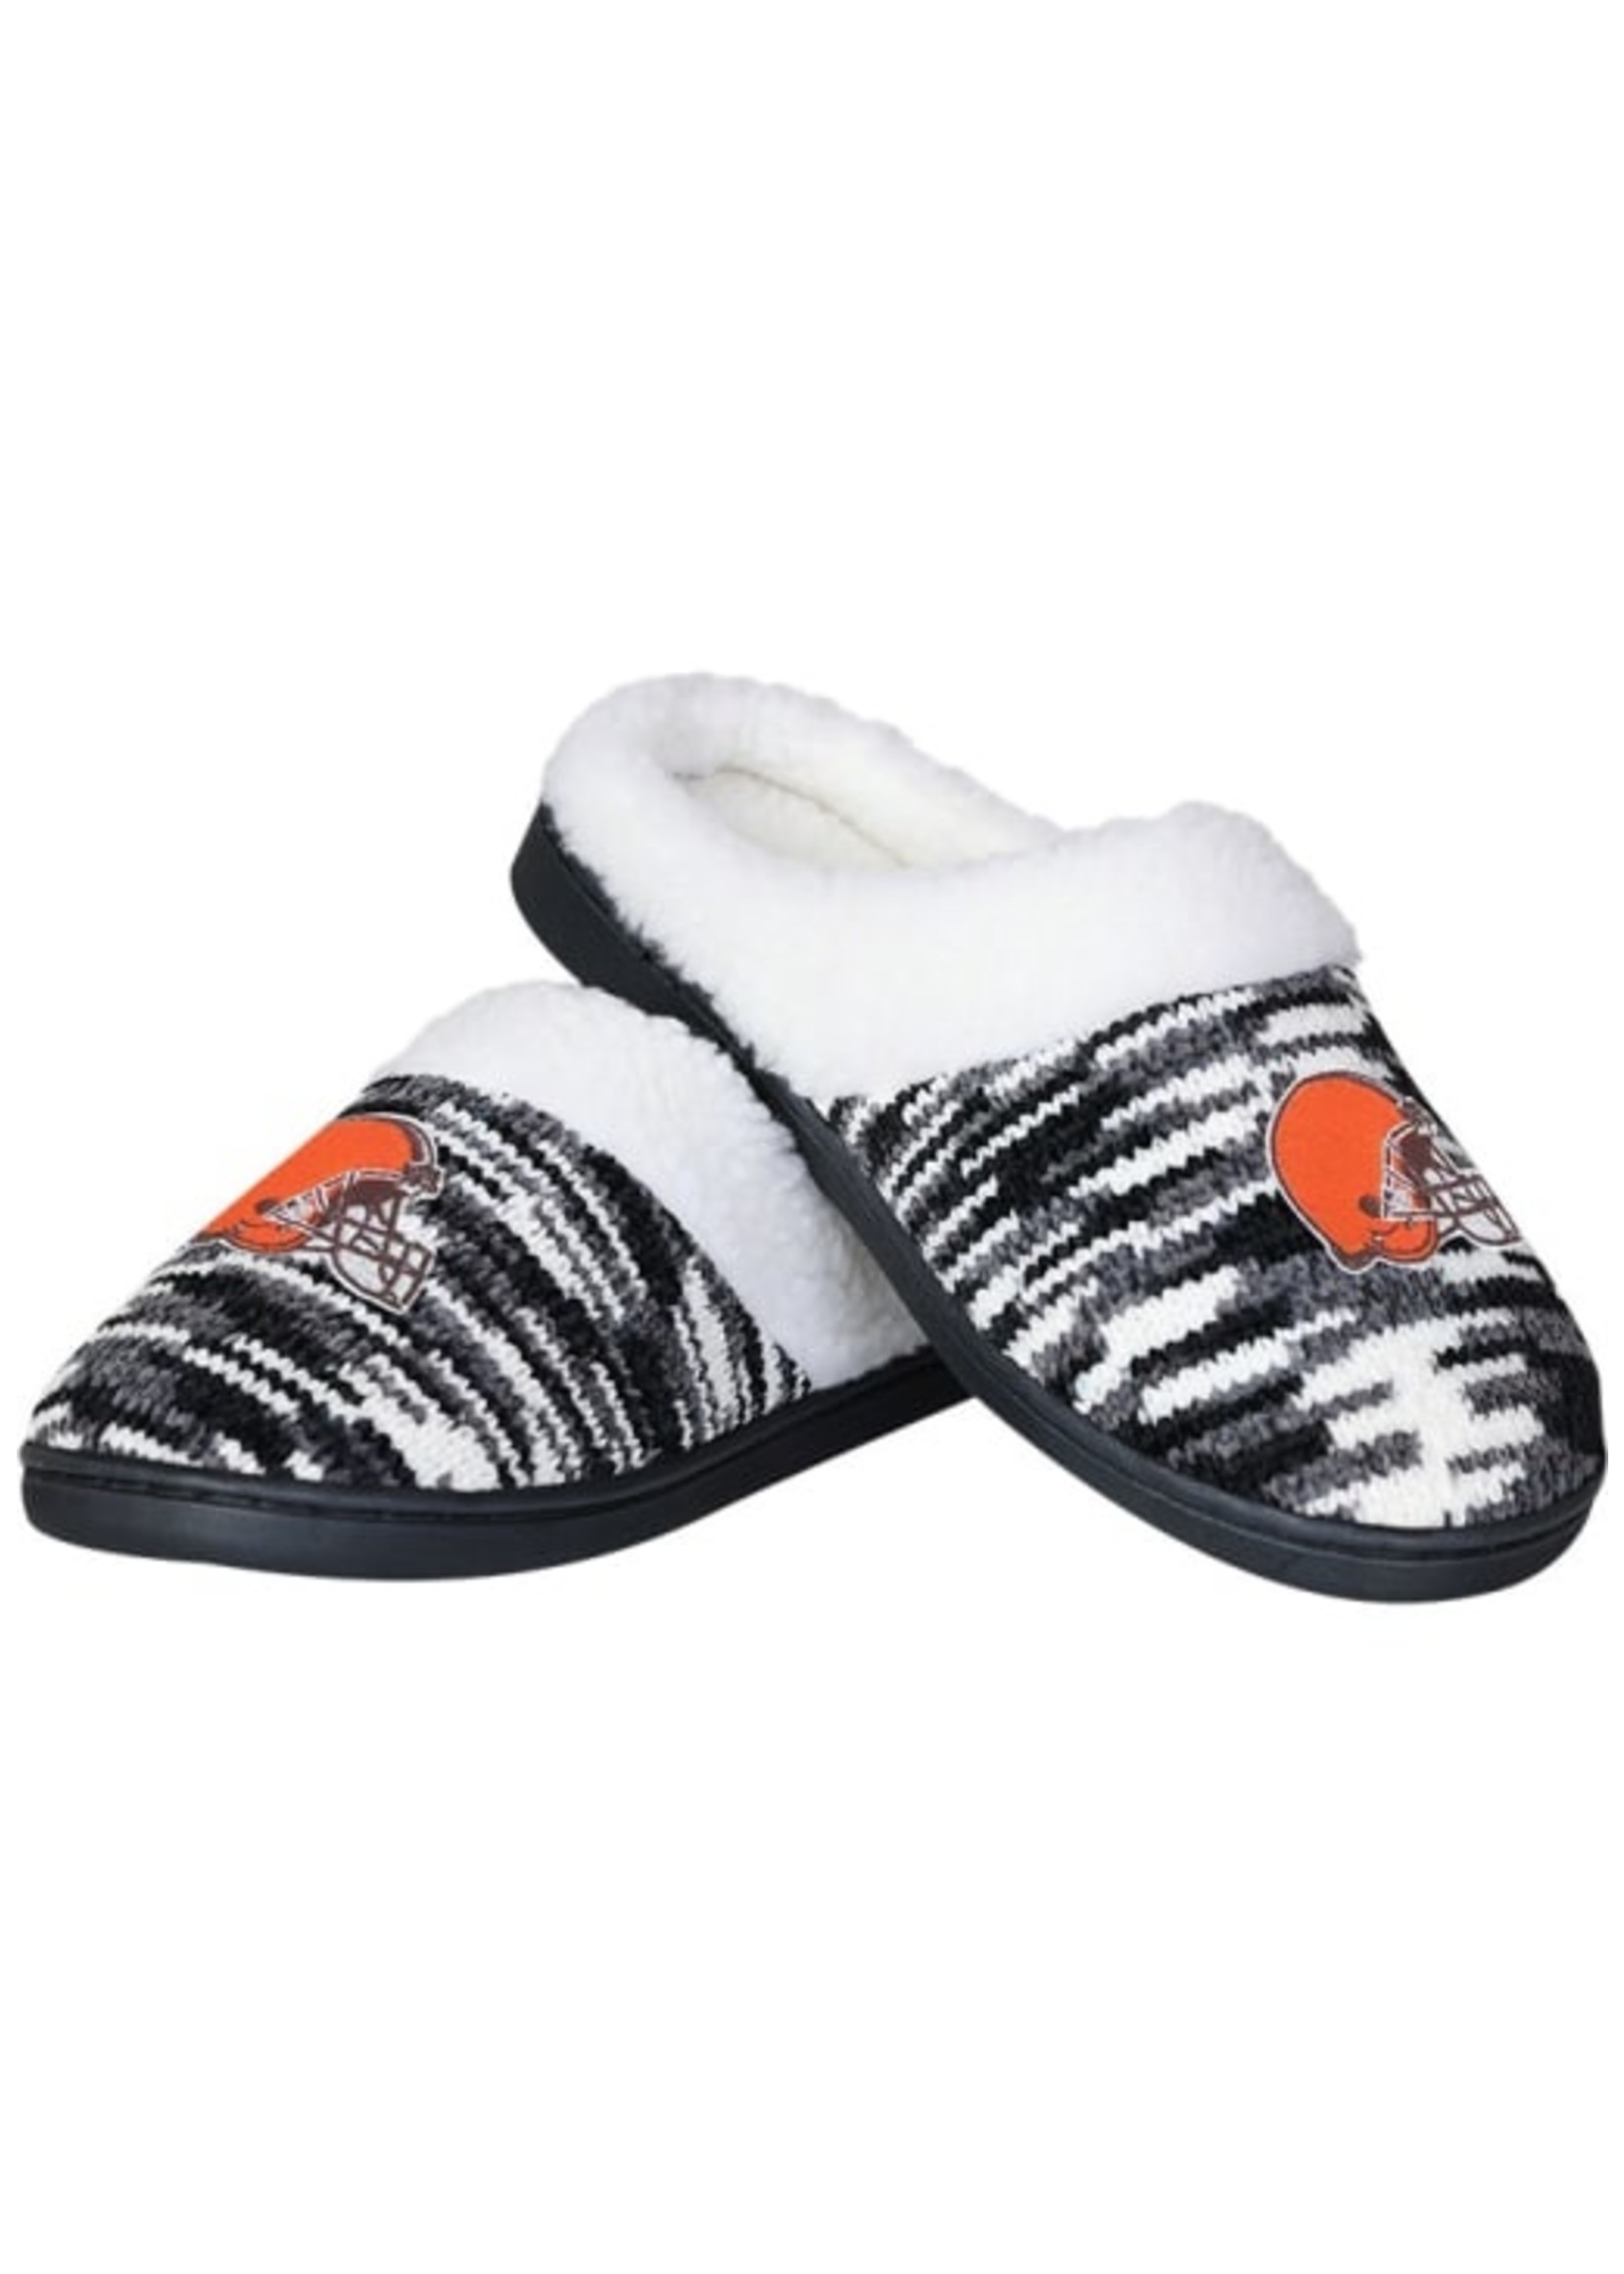 Cleveland Browns Sherpa Slippers